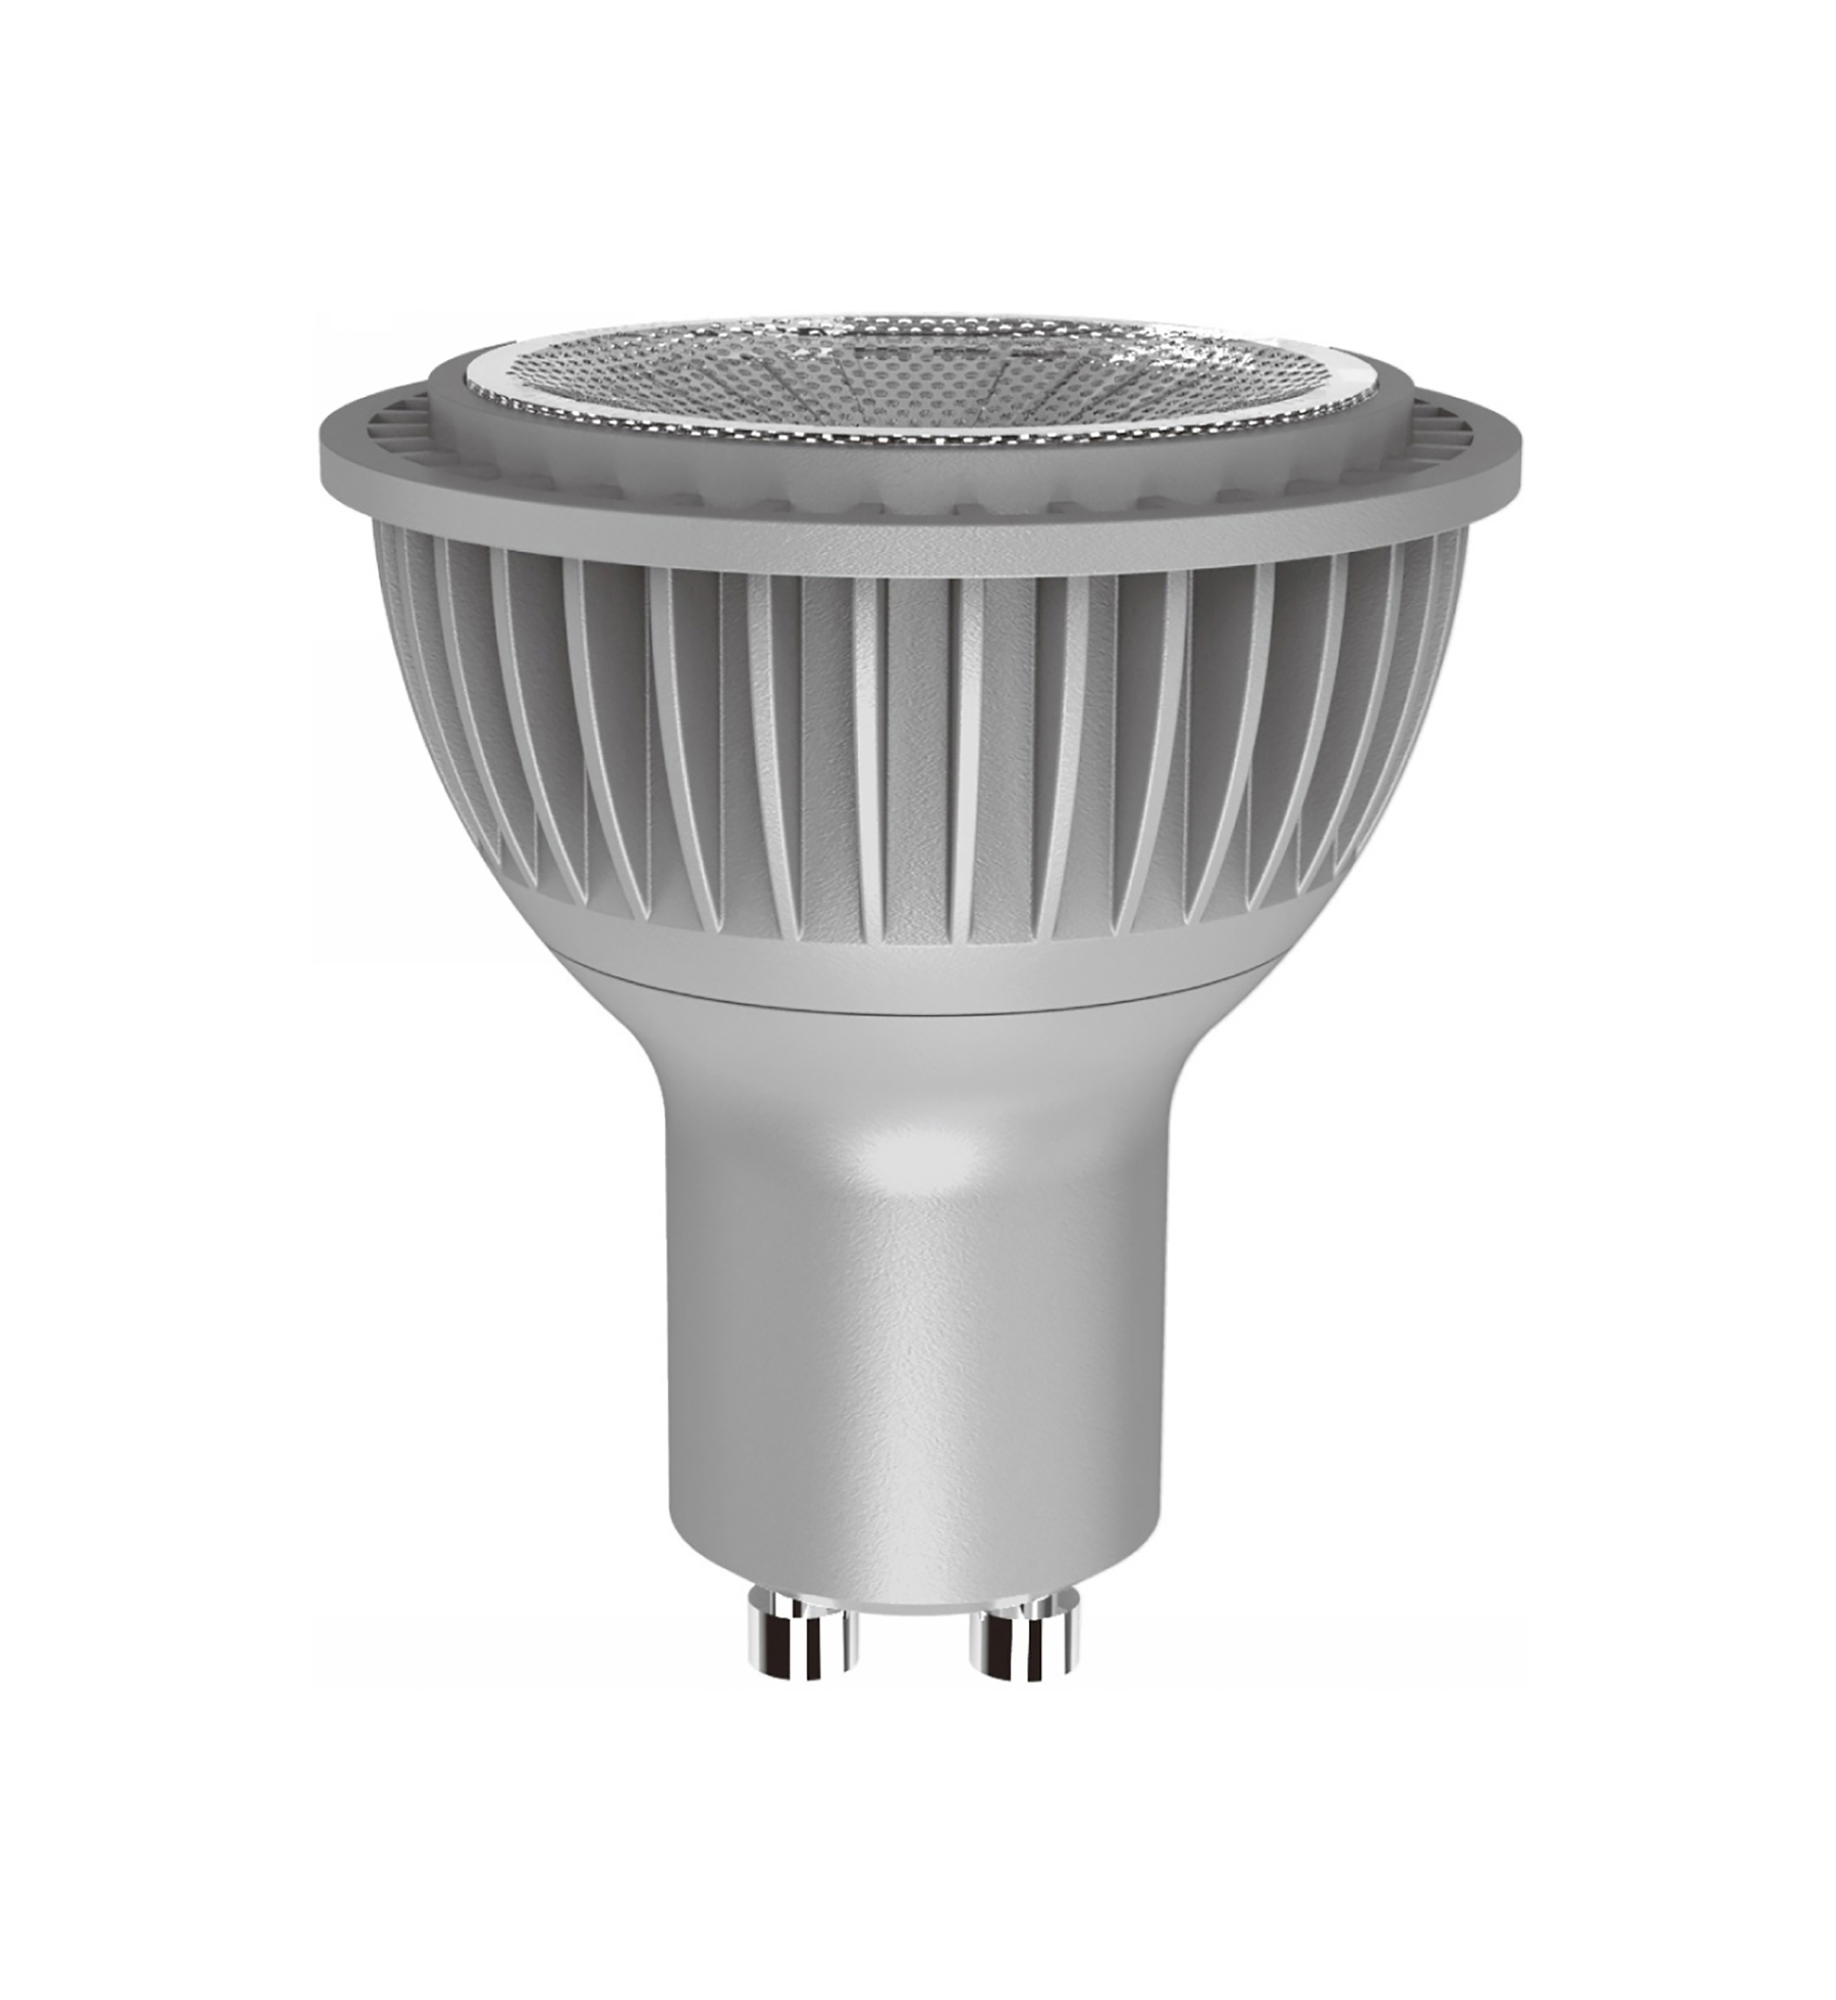 746200031  Truevision LED GU10 Dimmable 7W White 6400K 450lm